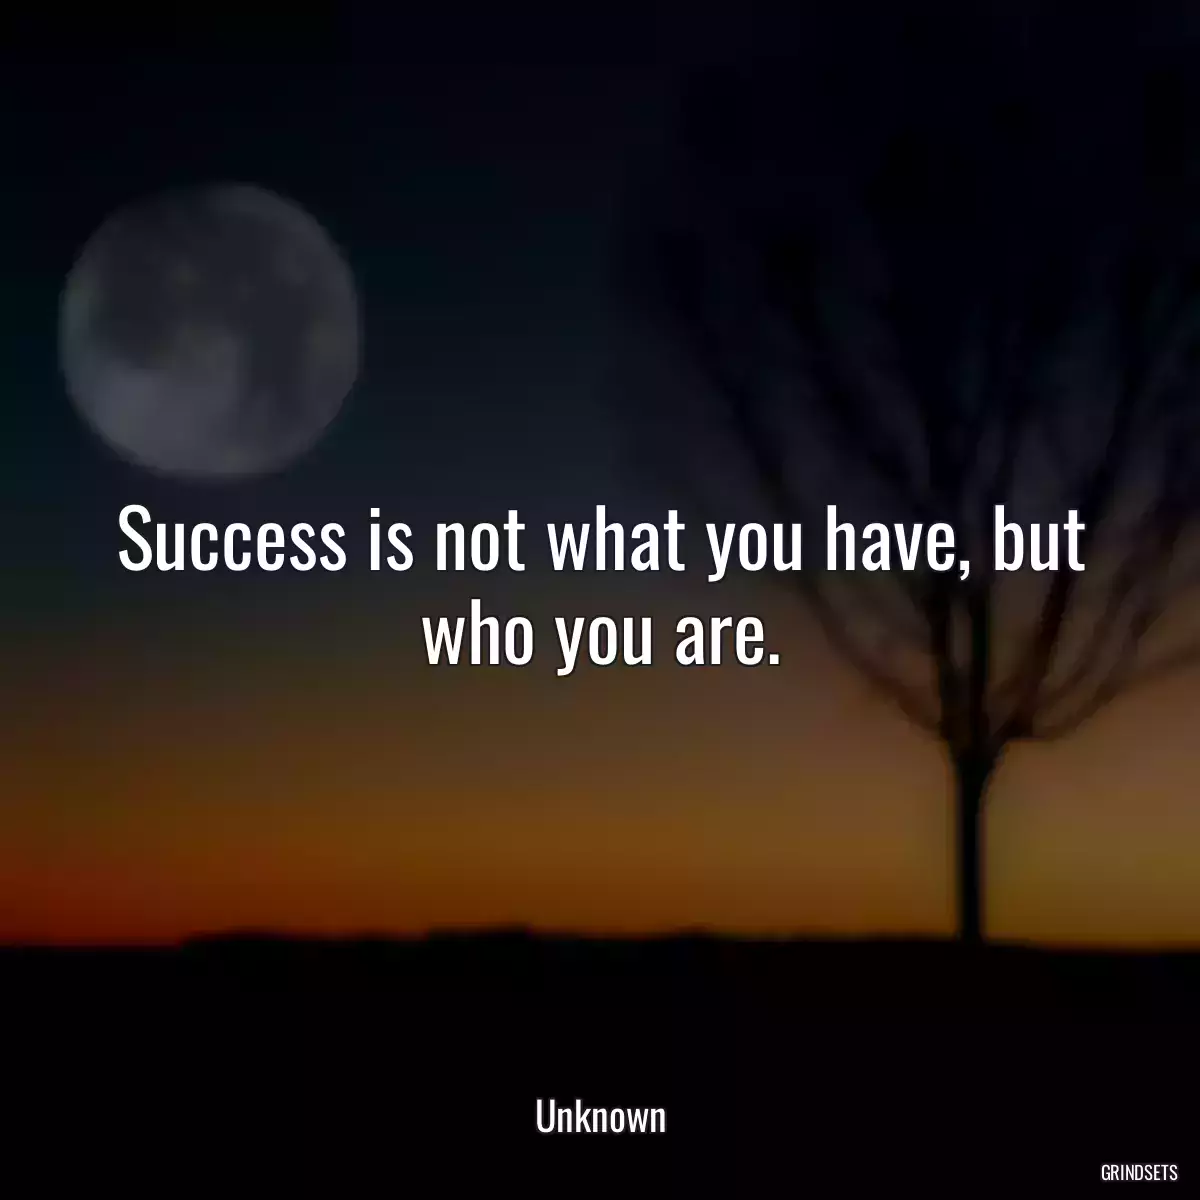 Success is not what you have, but who you are.